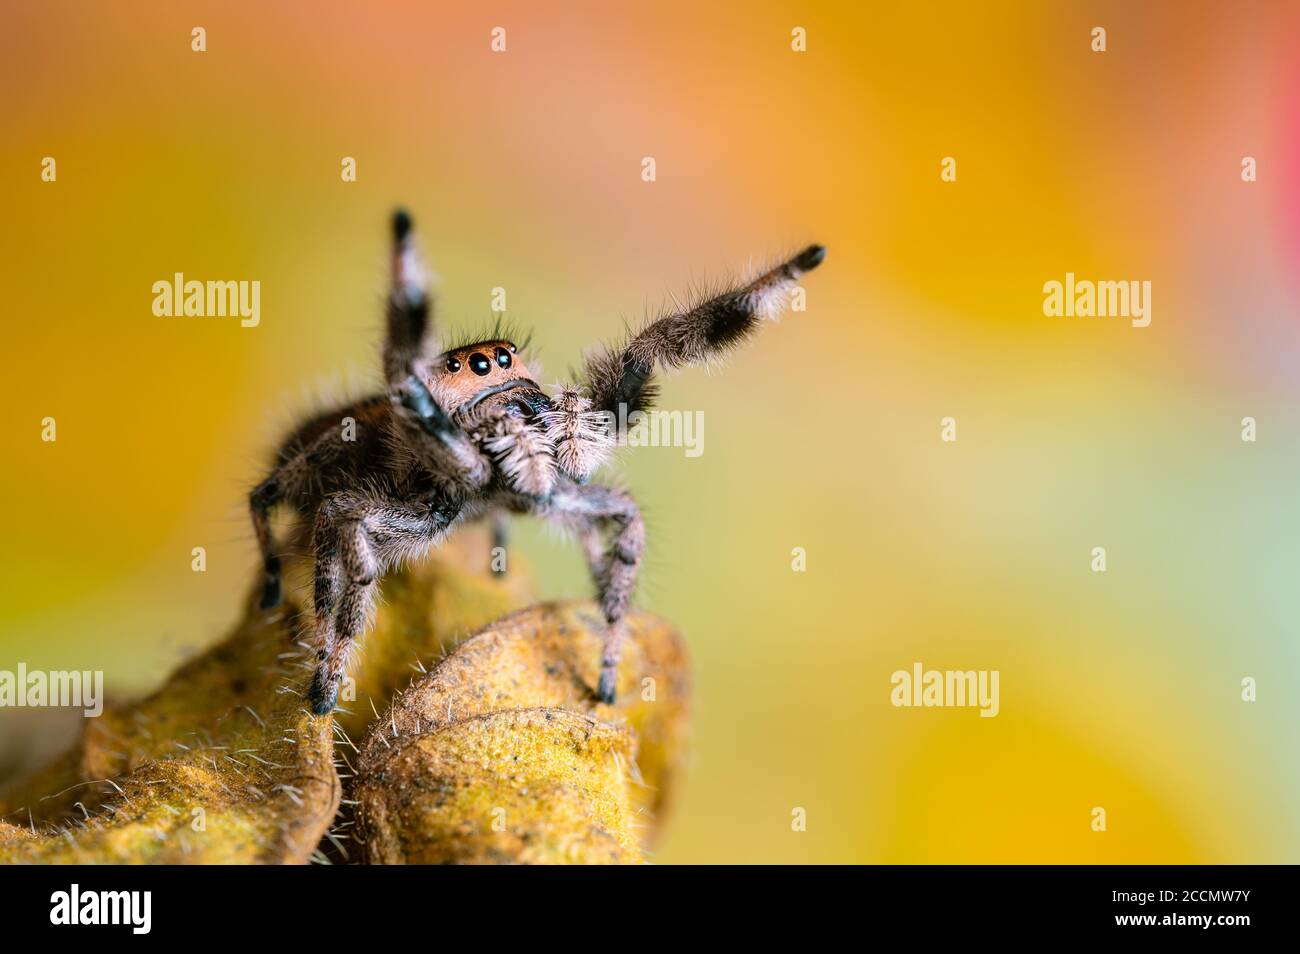 A female jumping spider (Phidippus regius) crawling on a dry leaf. Autumn warm colors, macro, sharp details. Beautiful huge eyes are looking at the ca Stock Photo